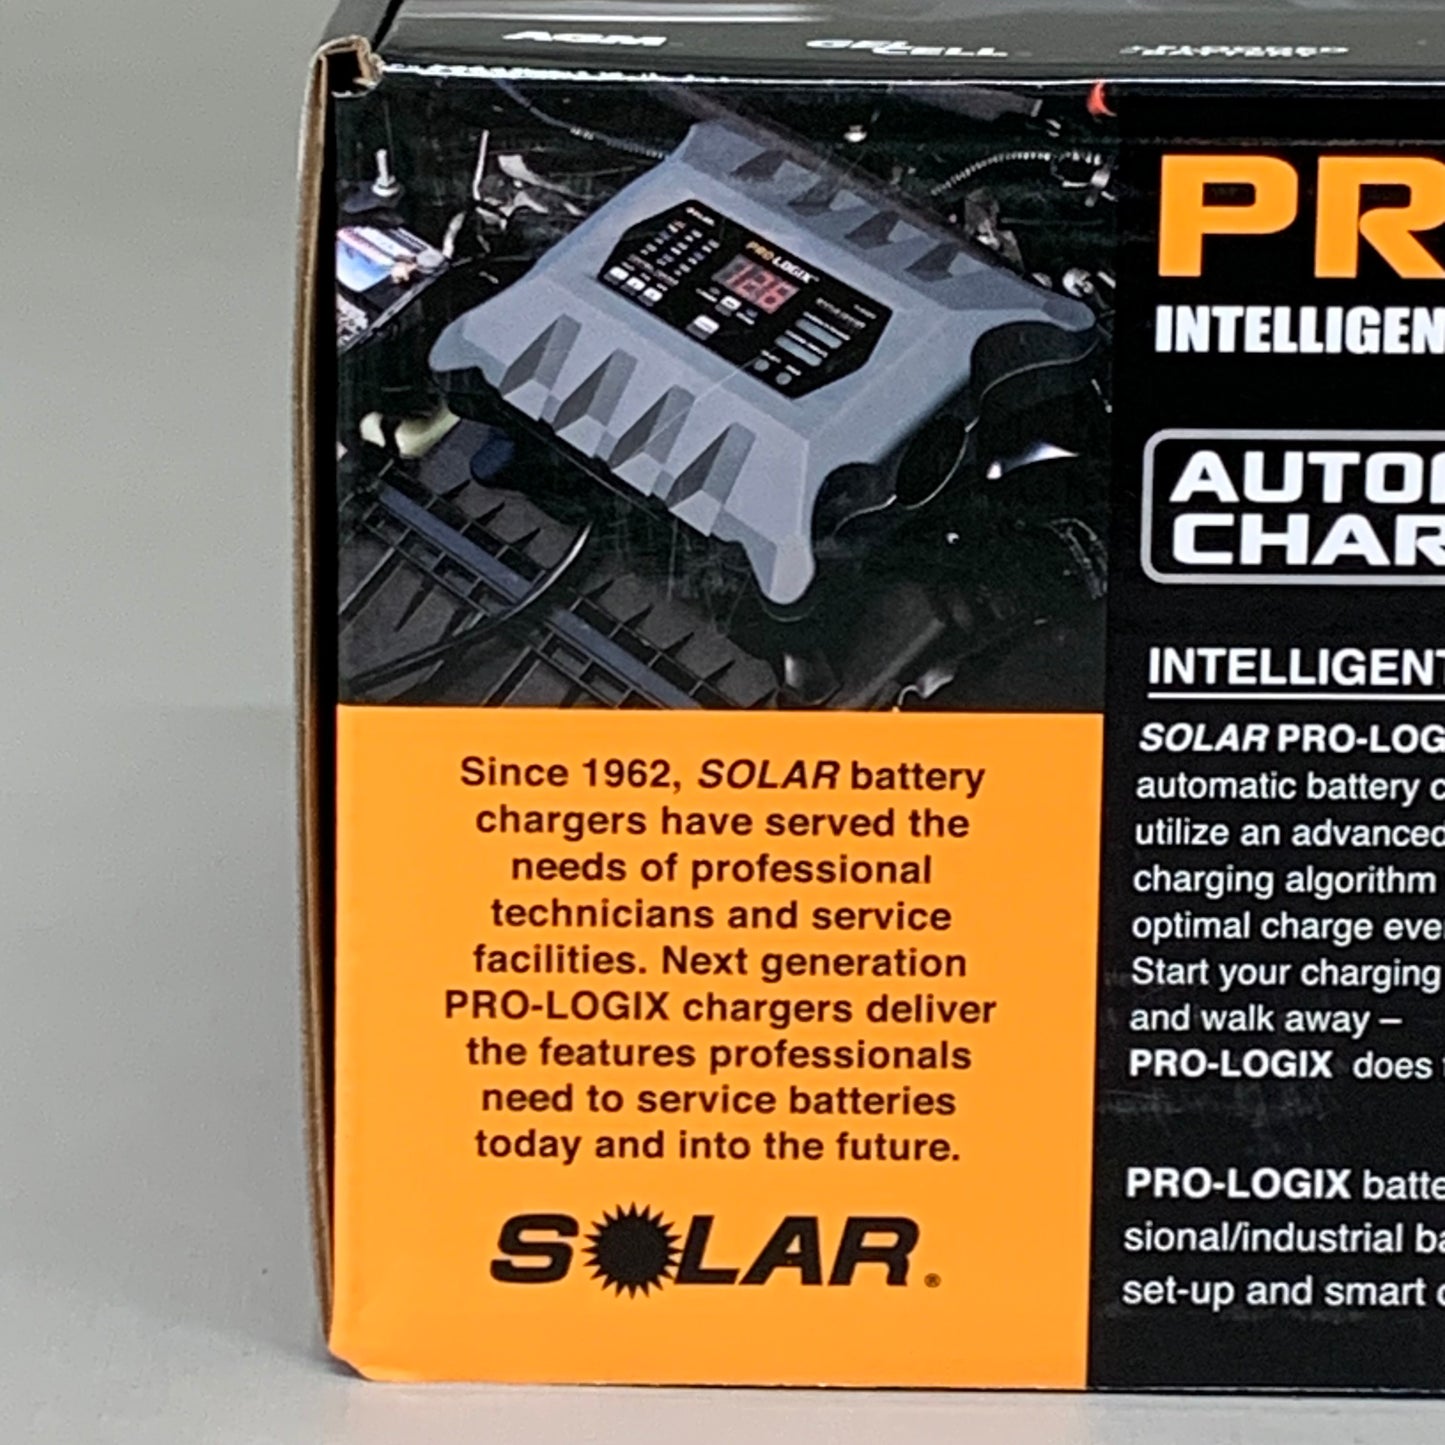 SOLAR Intelligent Battery Charger/Maintainer w/Power Supply 20 AMP Grey PL2320